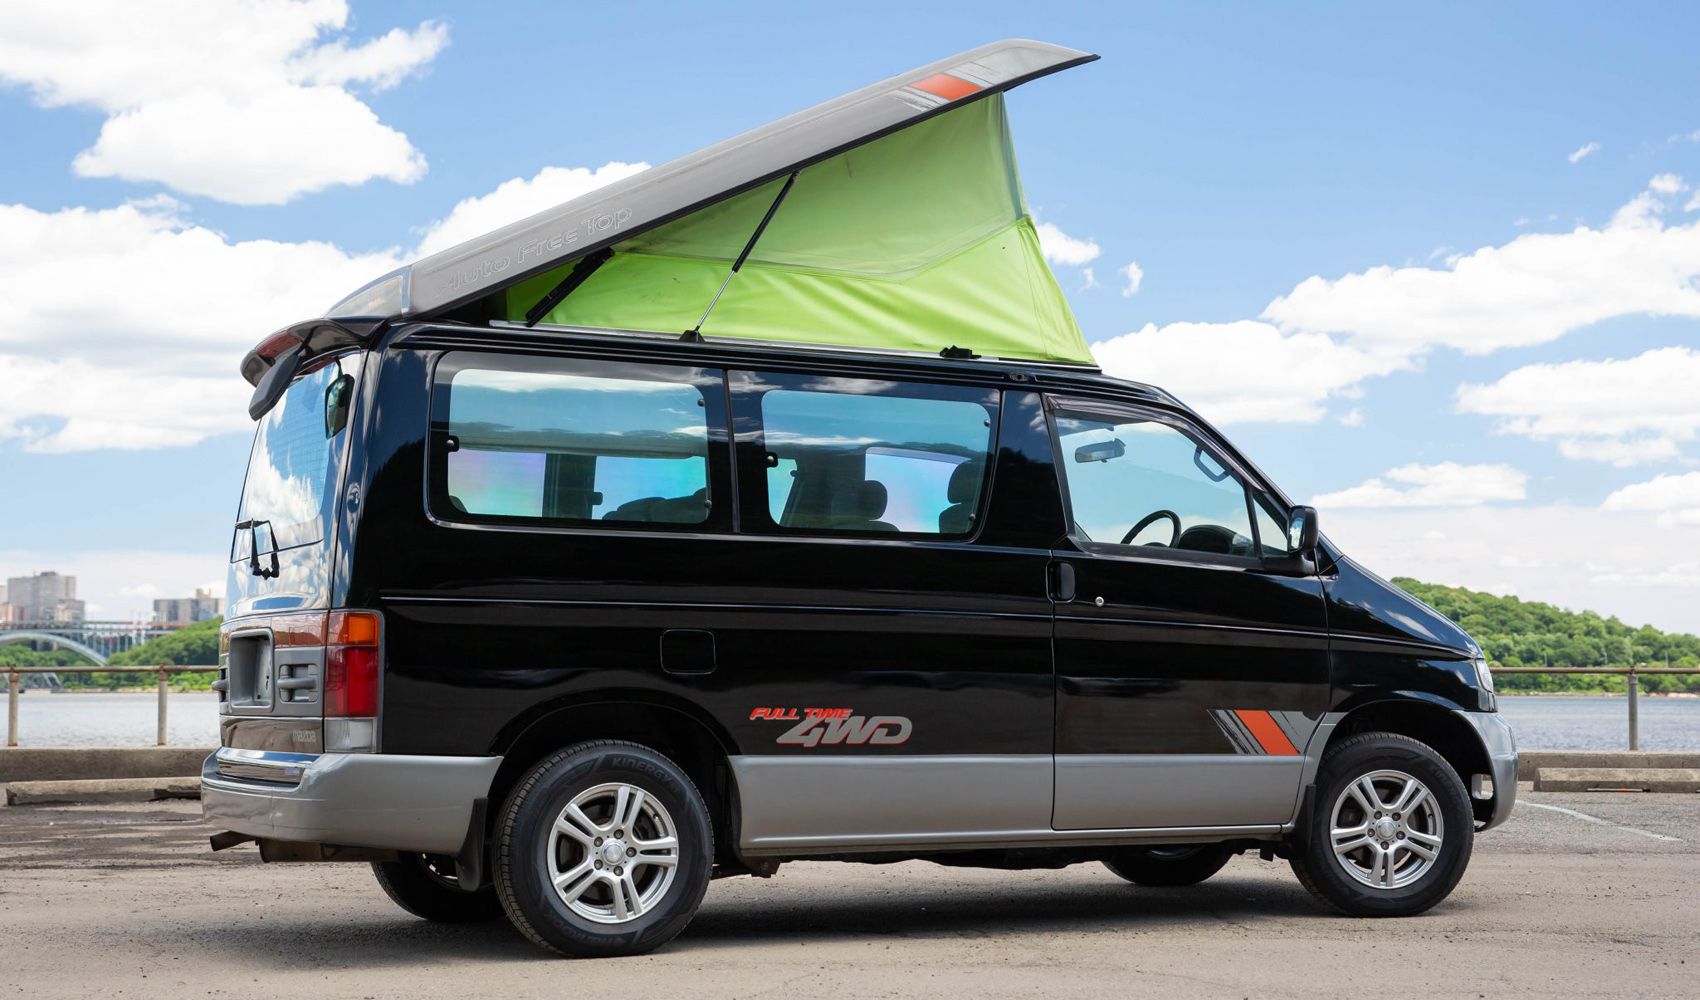 JDM 1996 Mazda Bongo Friendee Turbodiesel 4WD With Pop-Up Roof Tent